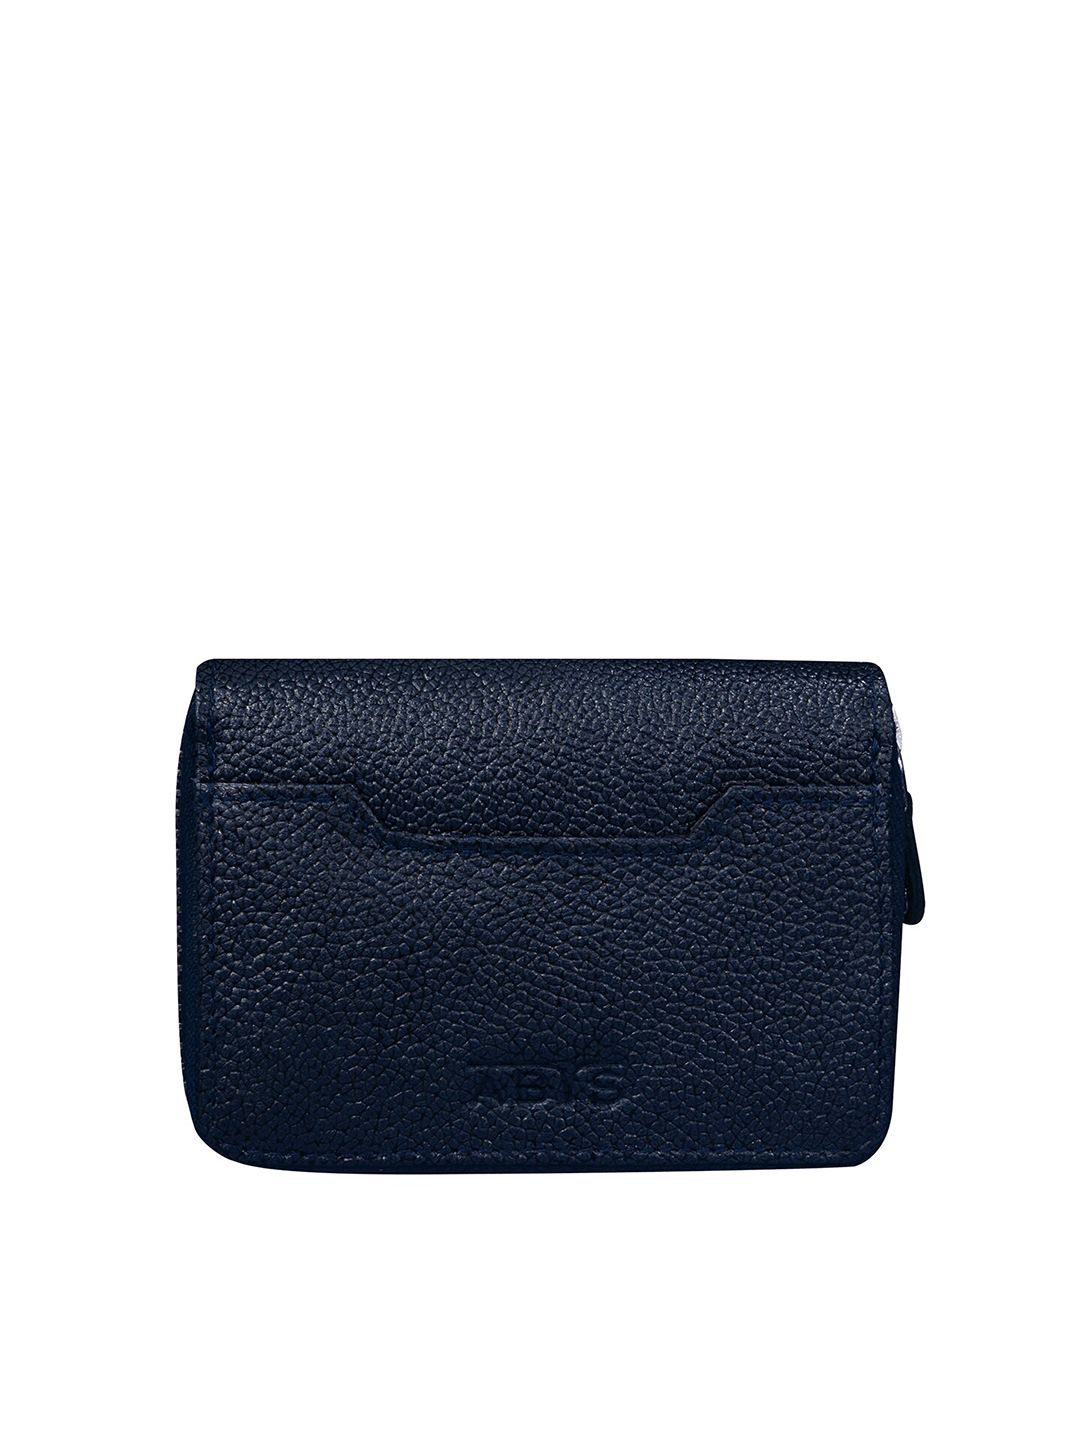 ABYS Unisex Blue & Gold-Toned Textured Leather Zip Around Wallet Price in India